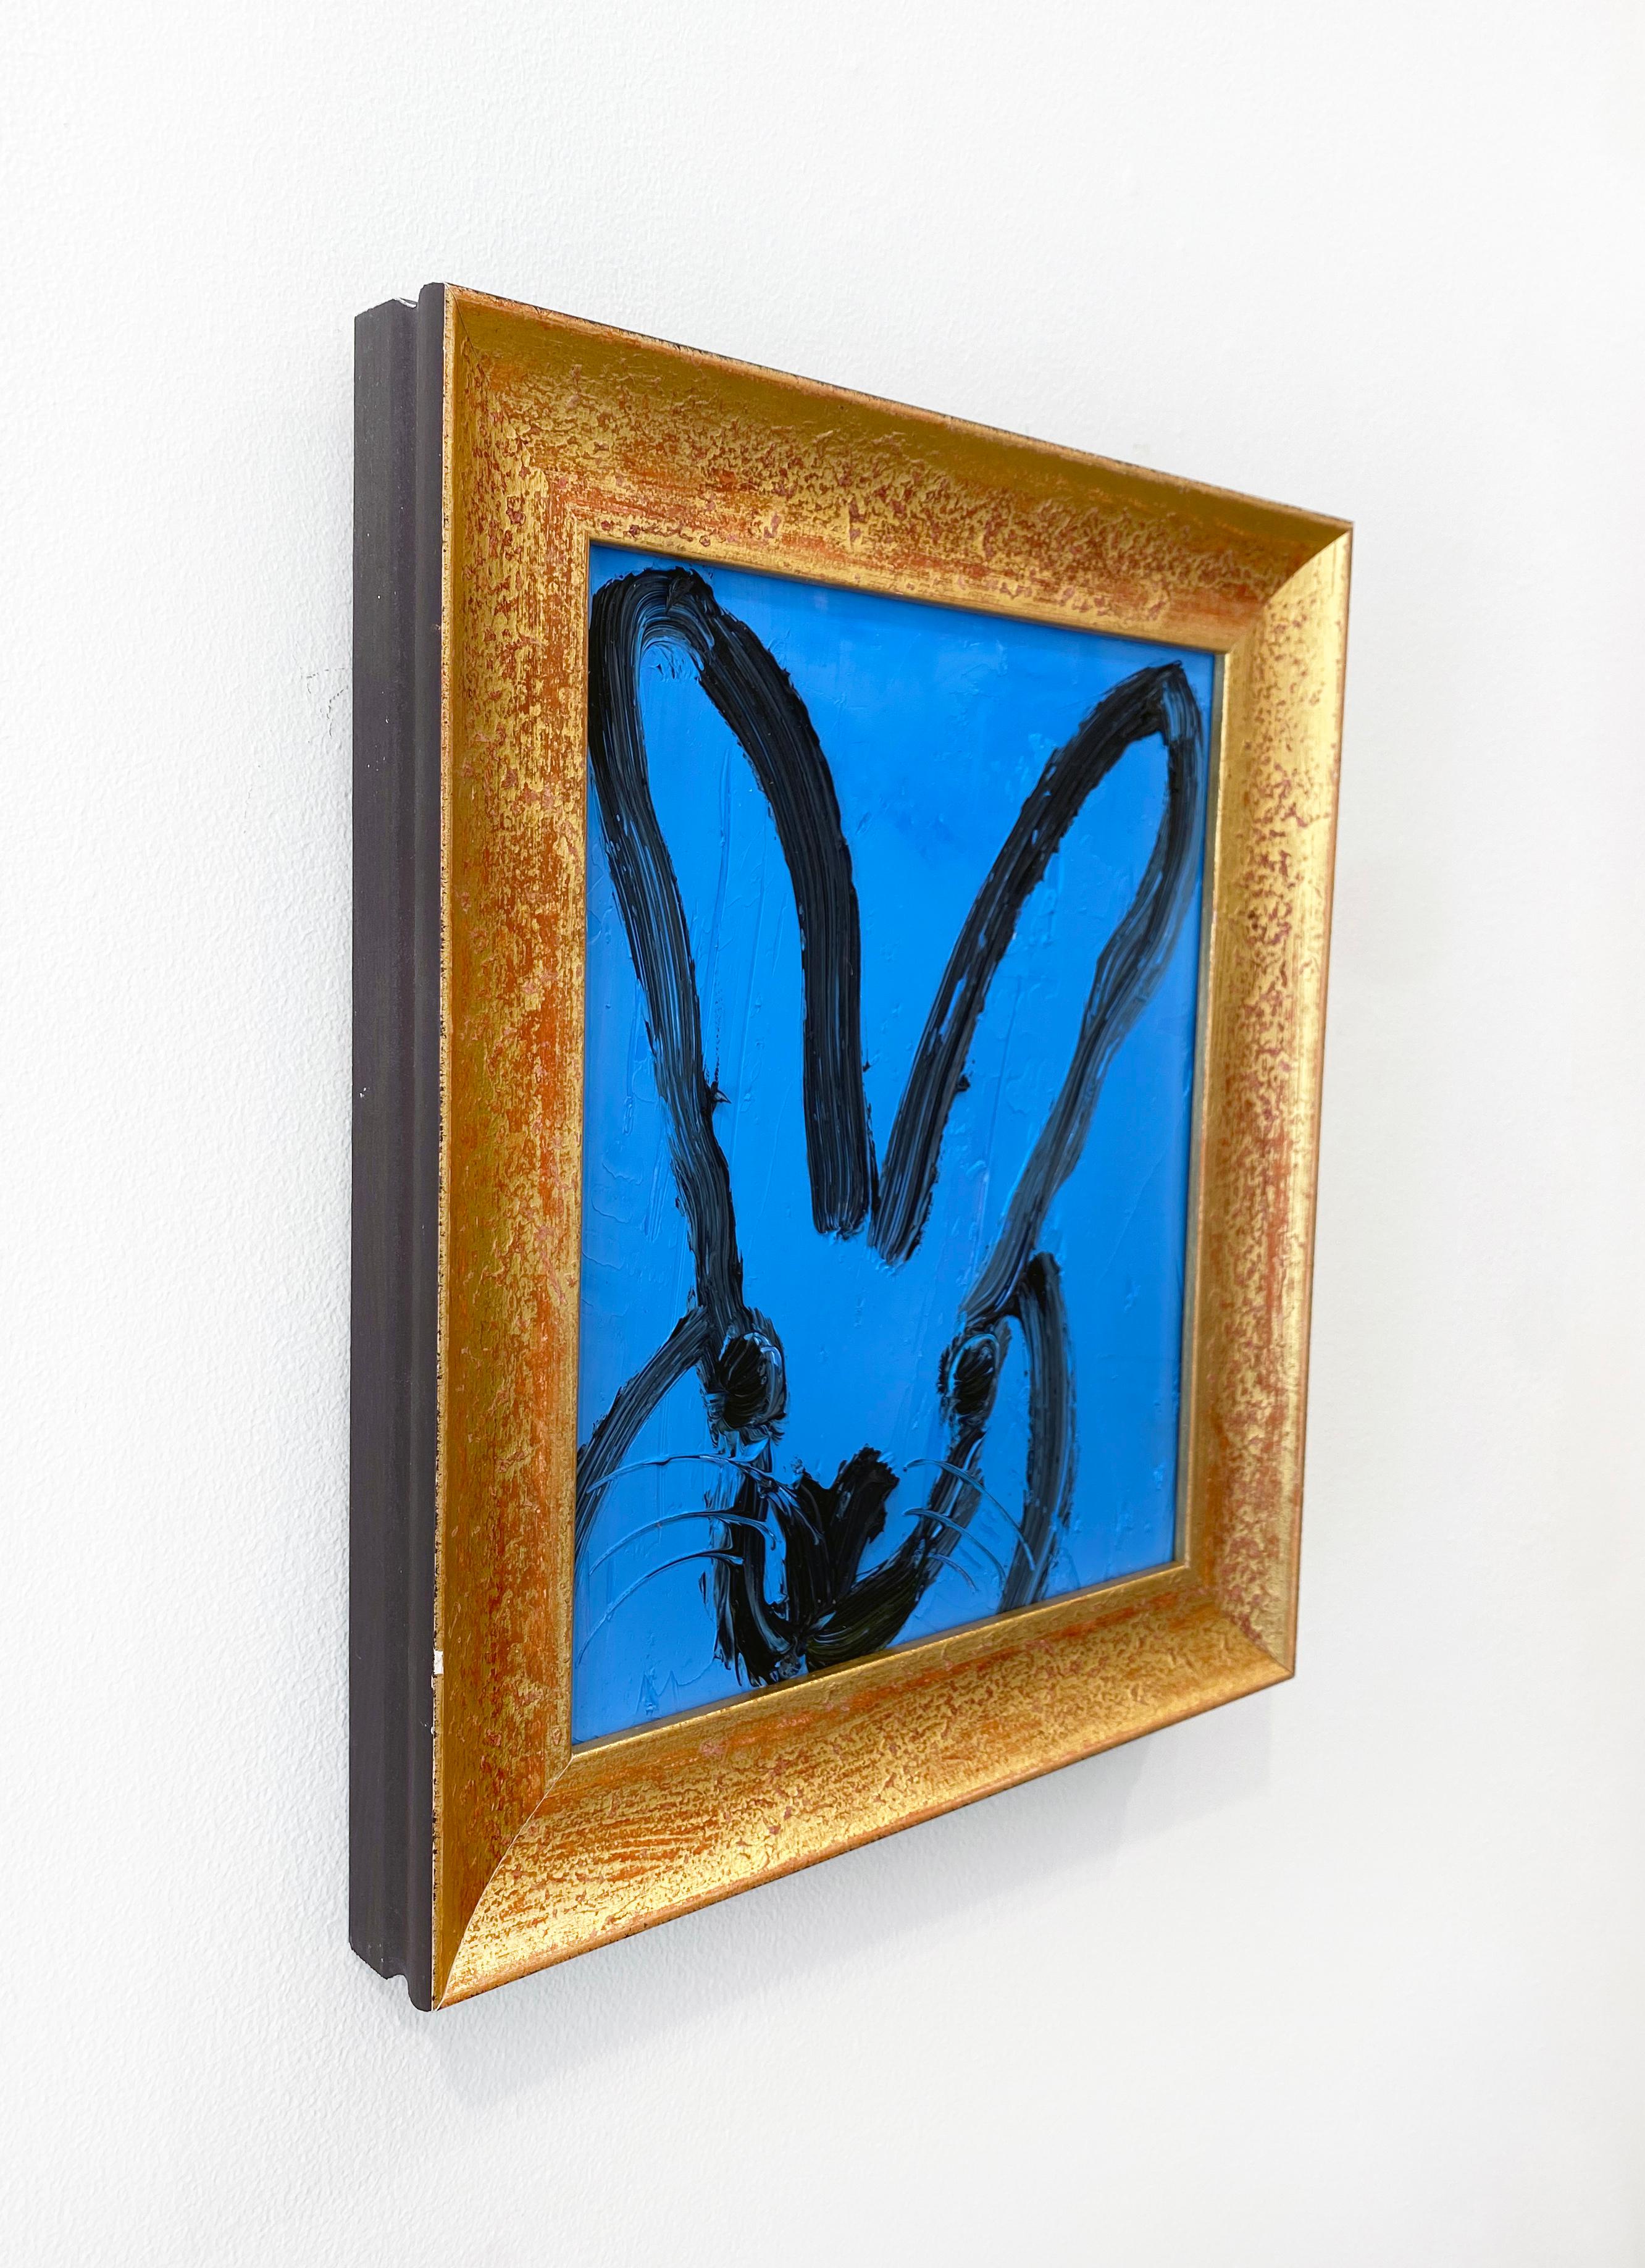 'Brandon' by Hunt Slonem, 2021. Oil on wood, 10 x 8 in. Framed size is 12.5 x 10.5 in. This painting features Slonem's signature bunny outlined in black on a bright blue background. This charming bunny features an expressive face with large eyes and